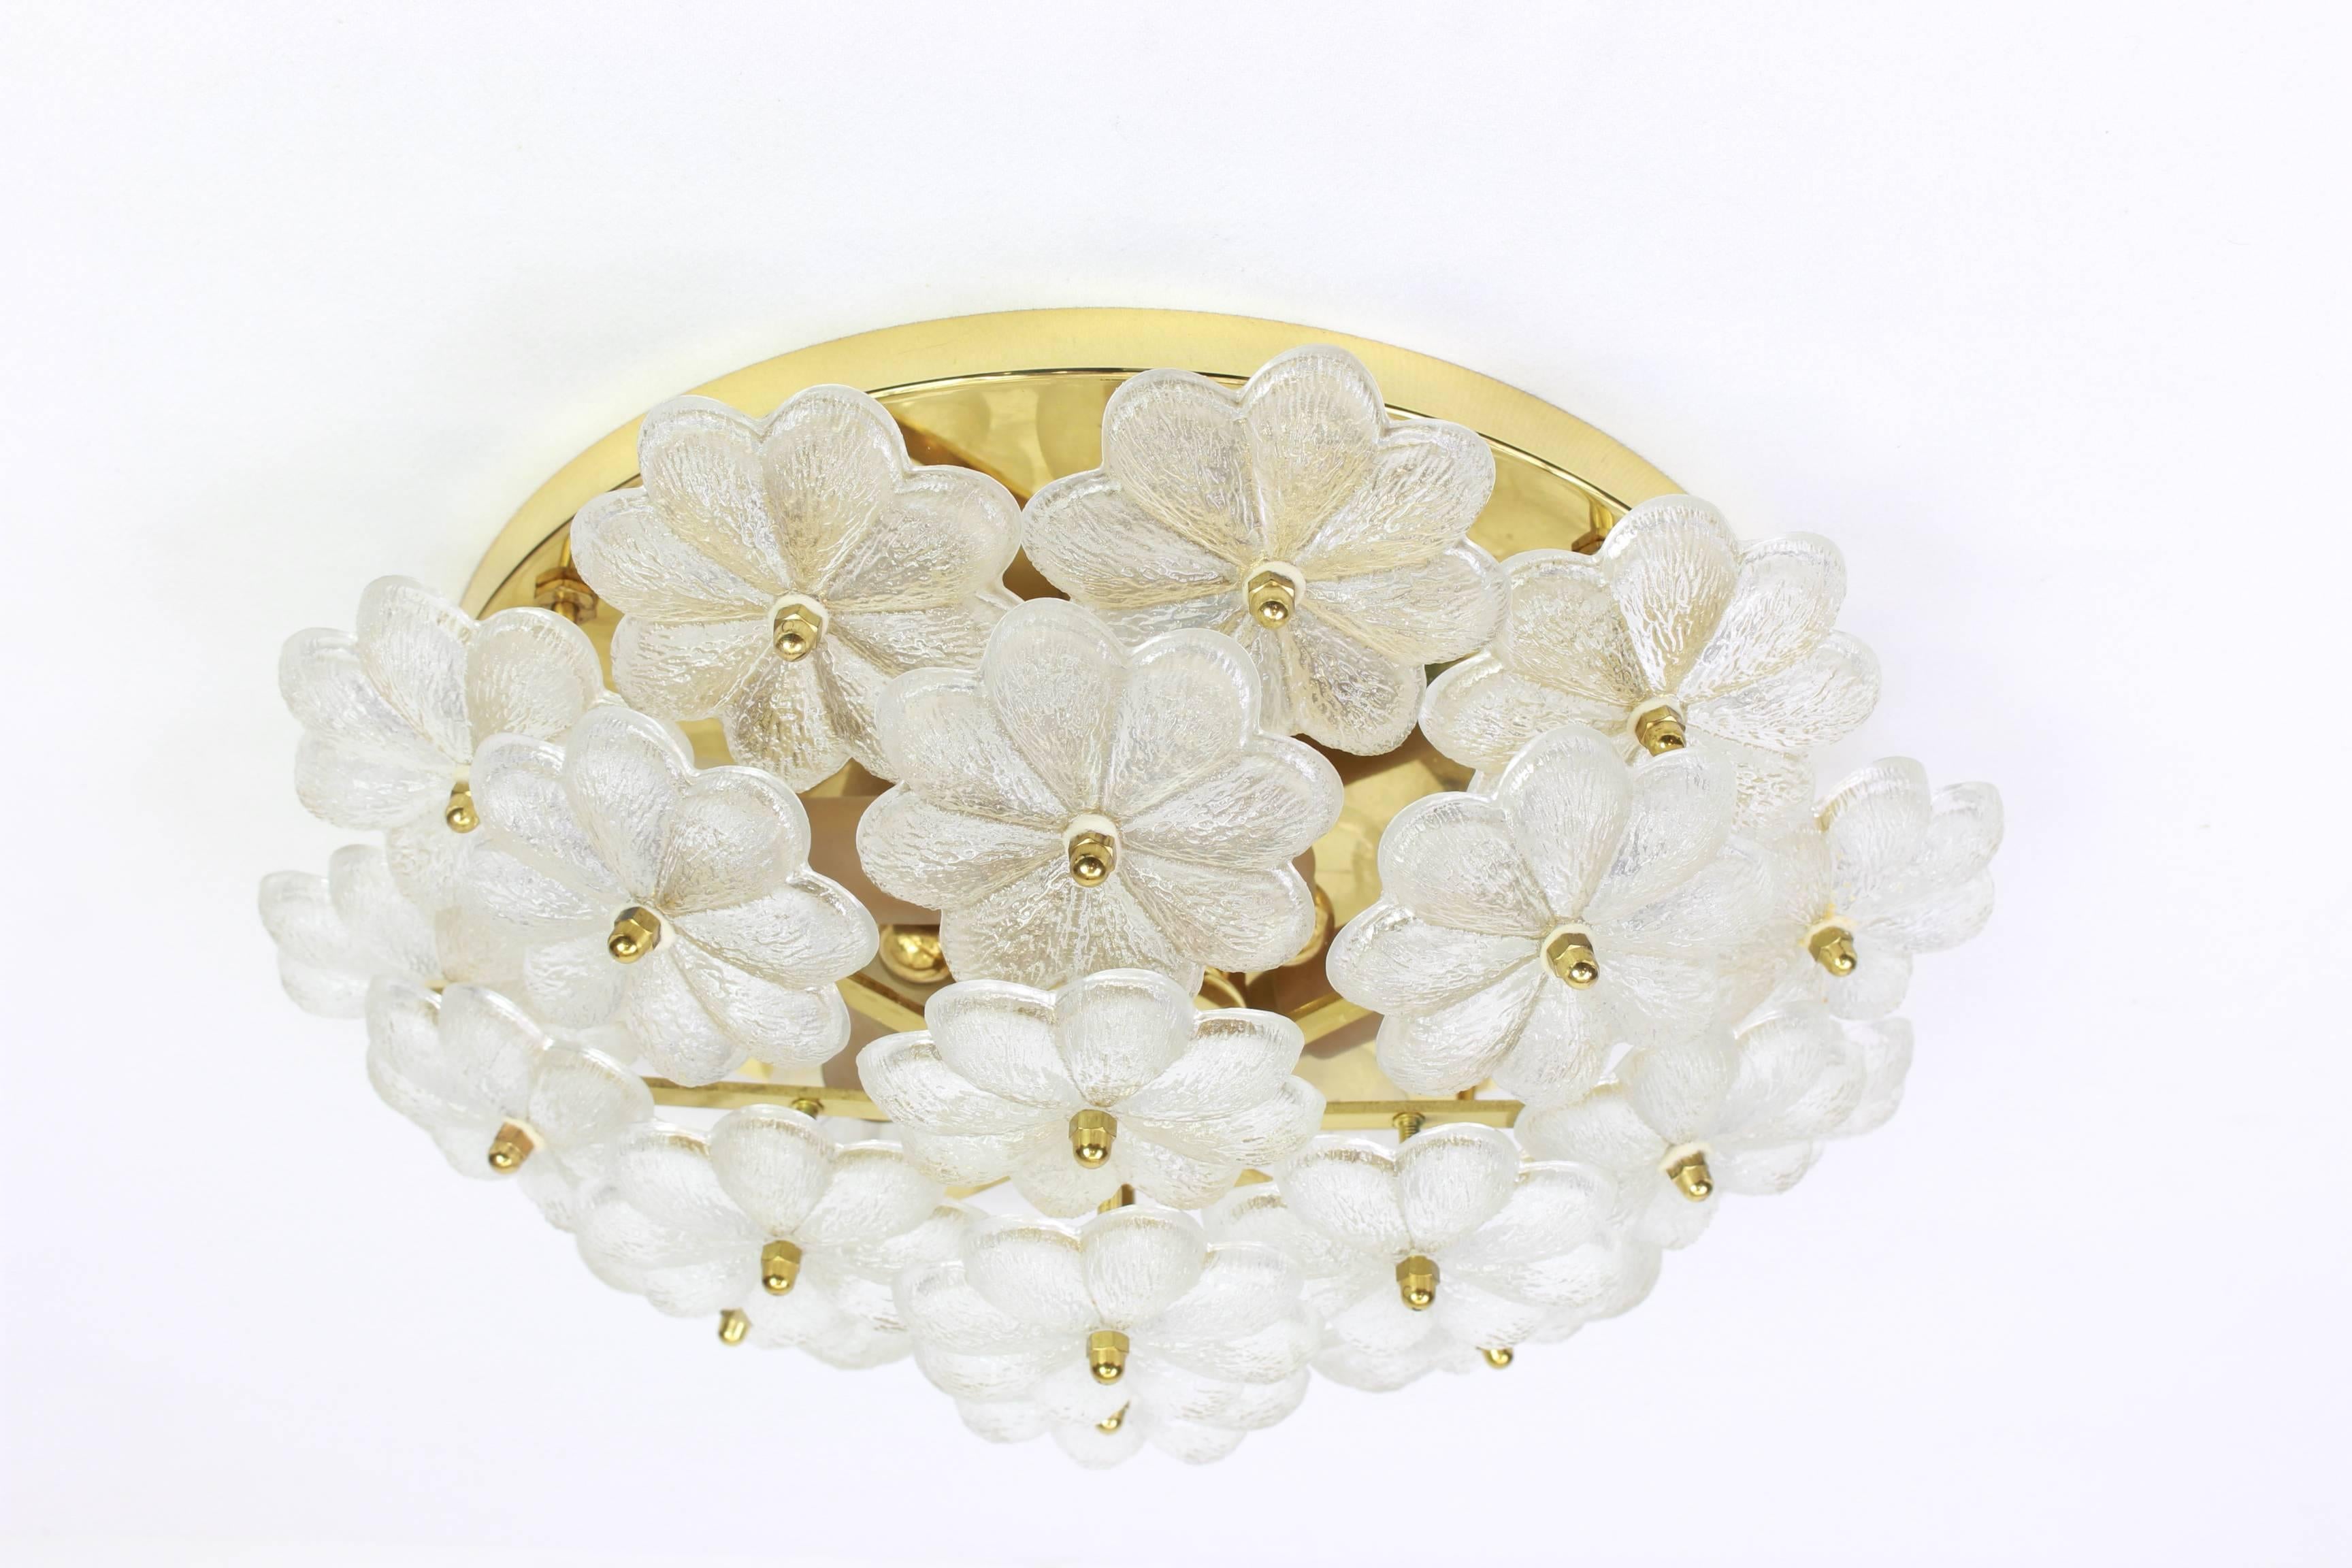 Midcentury flush mount light or Wall sconce with 24 Murano glass flowers over a polished brass base, made by Ernst Palme in Germany, 1970s

High quality and in very good condition. Cleaned, well-wired and ready to use. 

The fixture requires 5 x